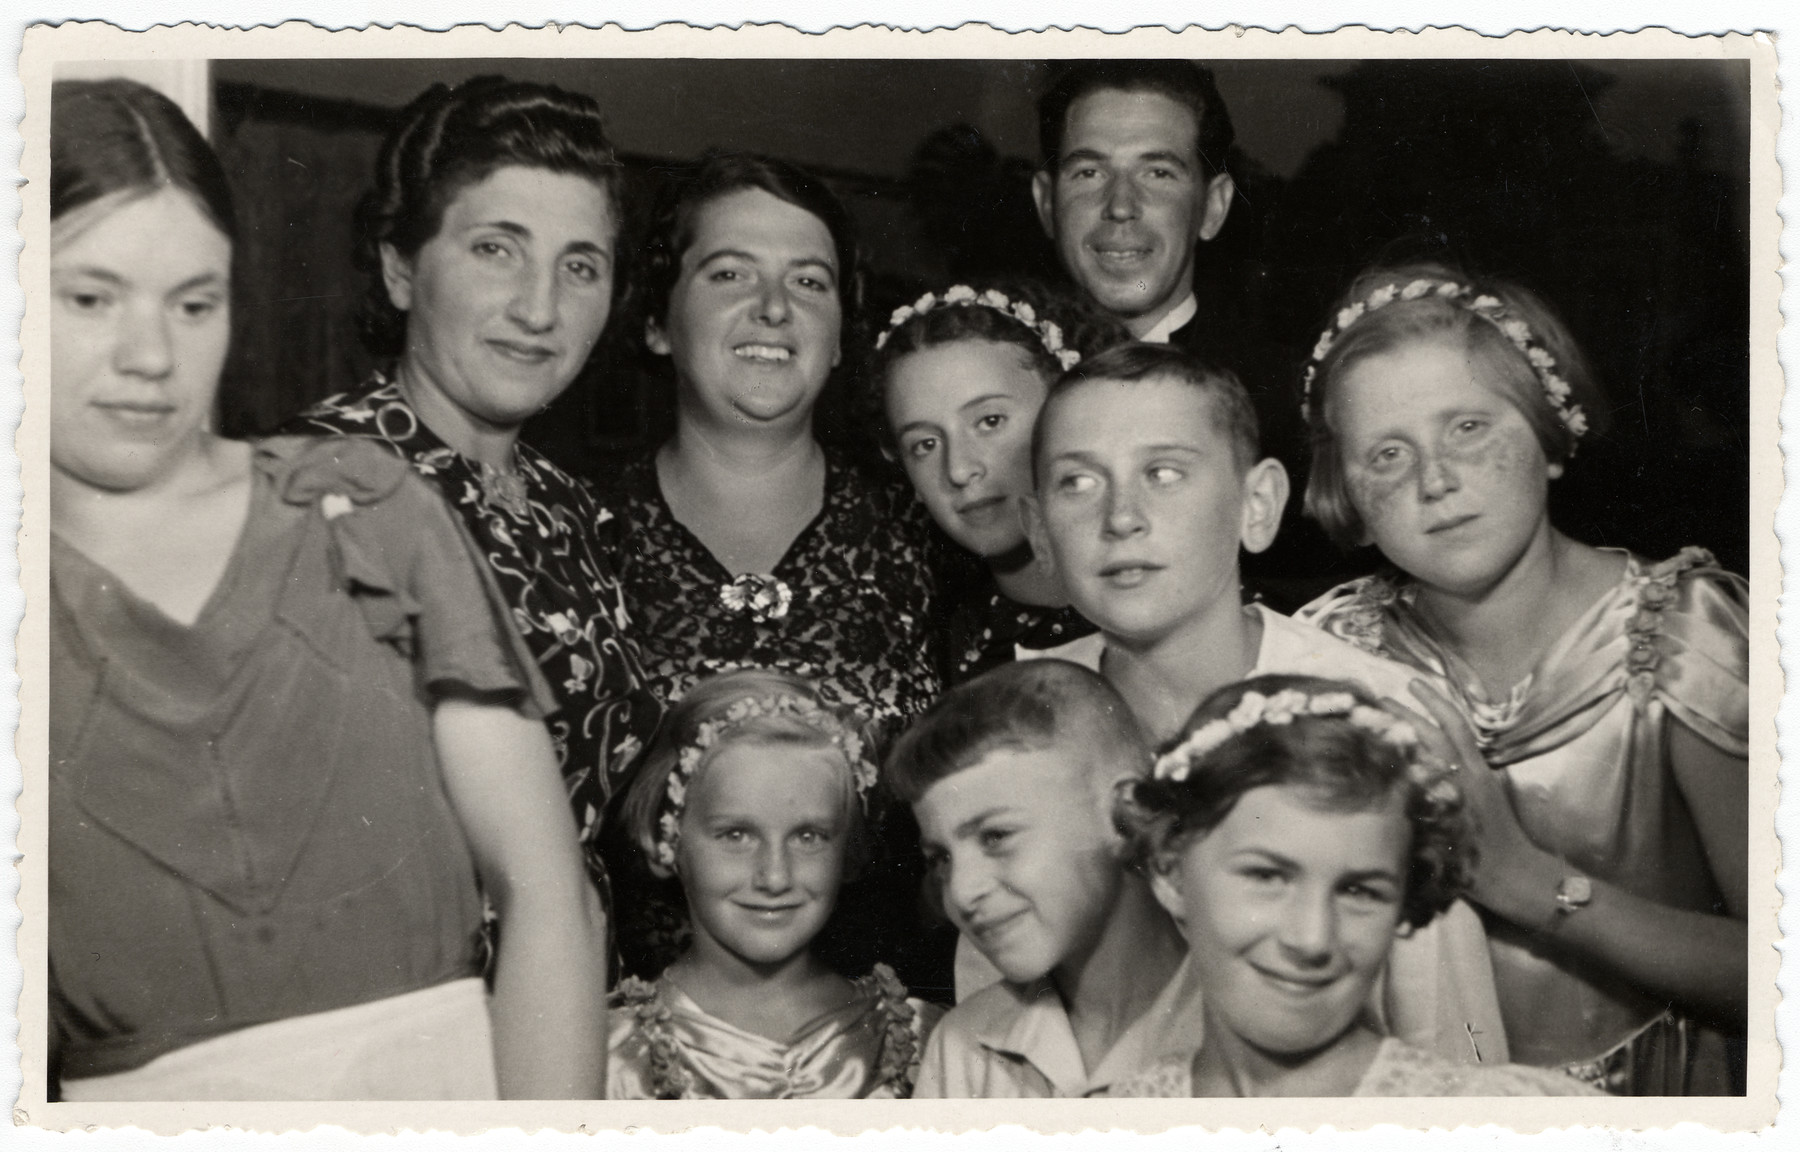 Group portrait of Latvian Jews at a wedding celebration.

Lia and Bella Levenstein (far left) pose in matching dresses among relatives and friends, during the wedding of David Levenstein and Hanna Thalberg in Ventspils, Latvia.  Frieda Lewenstein, Libin and Bella's mother (2nd from right), is also pictured. Neither Frieda nor her daughters survived the Holocaust.